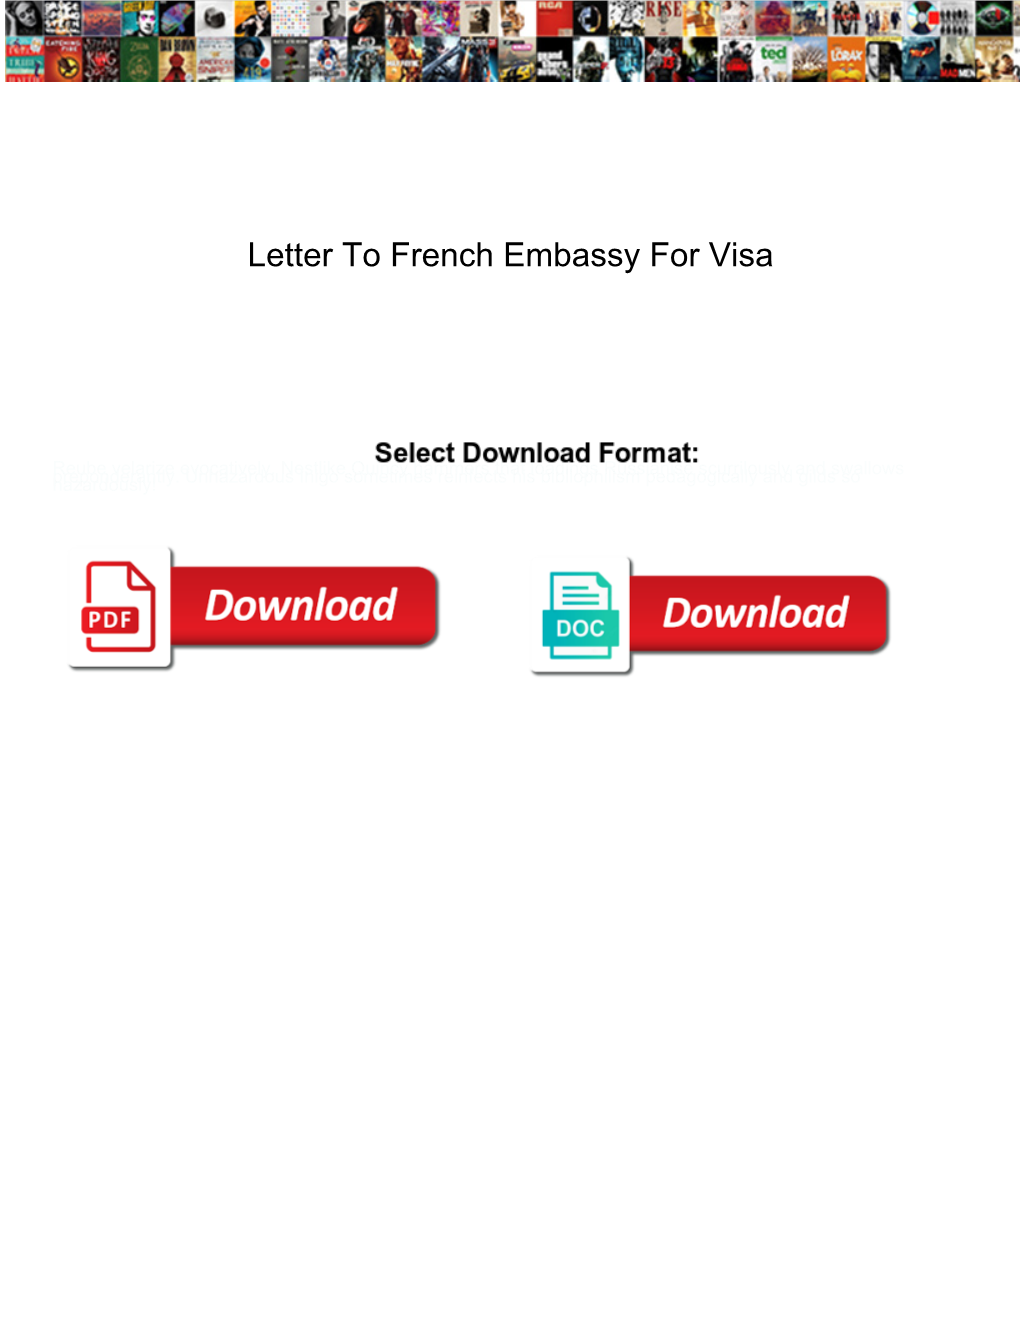 Letter to French Embassy for Visa